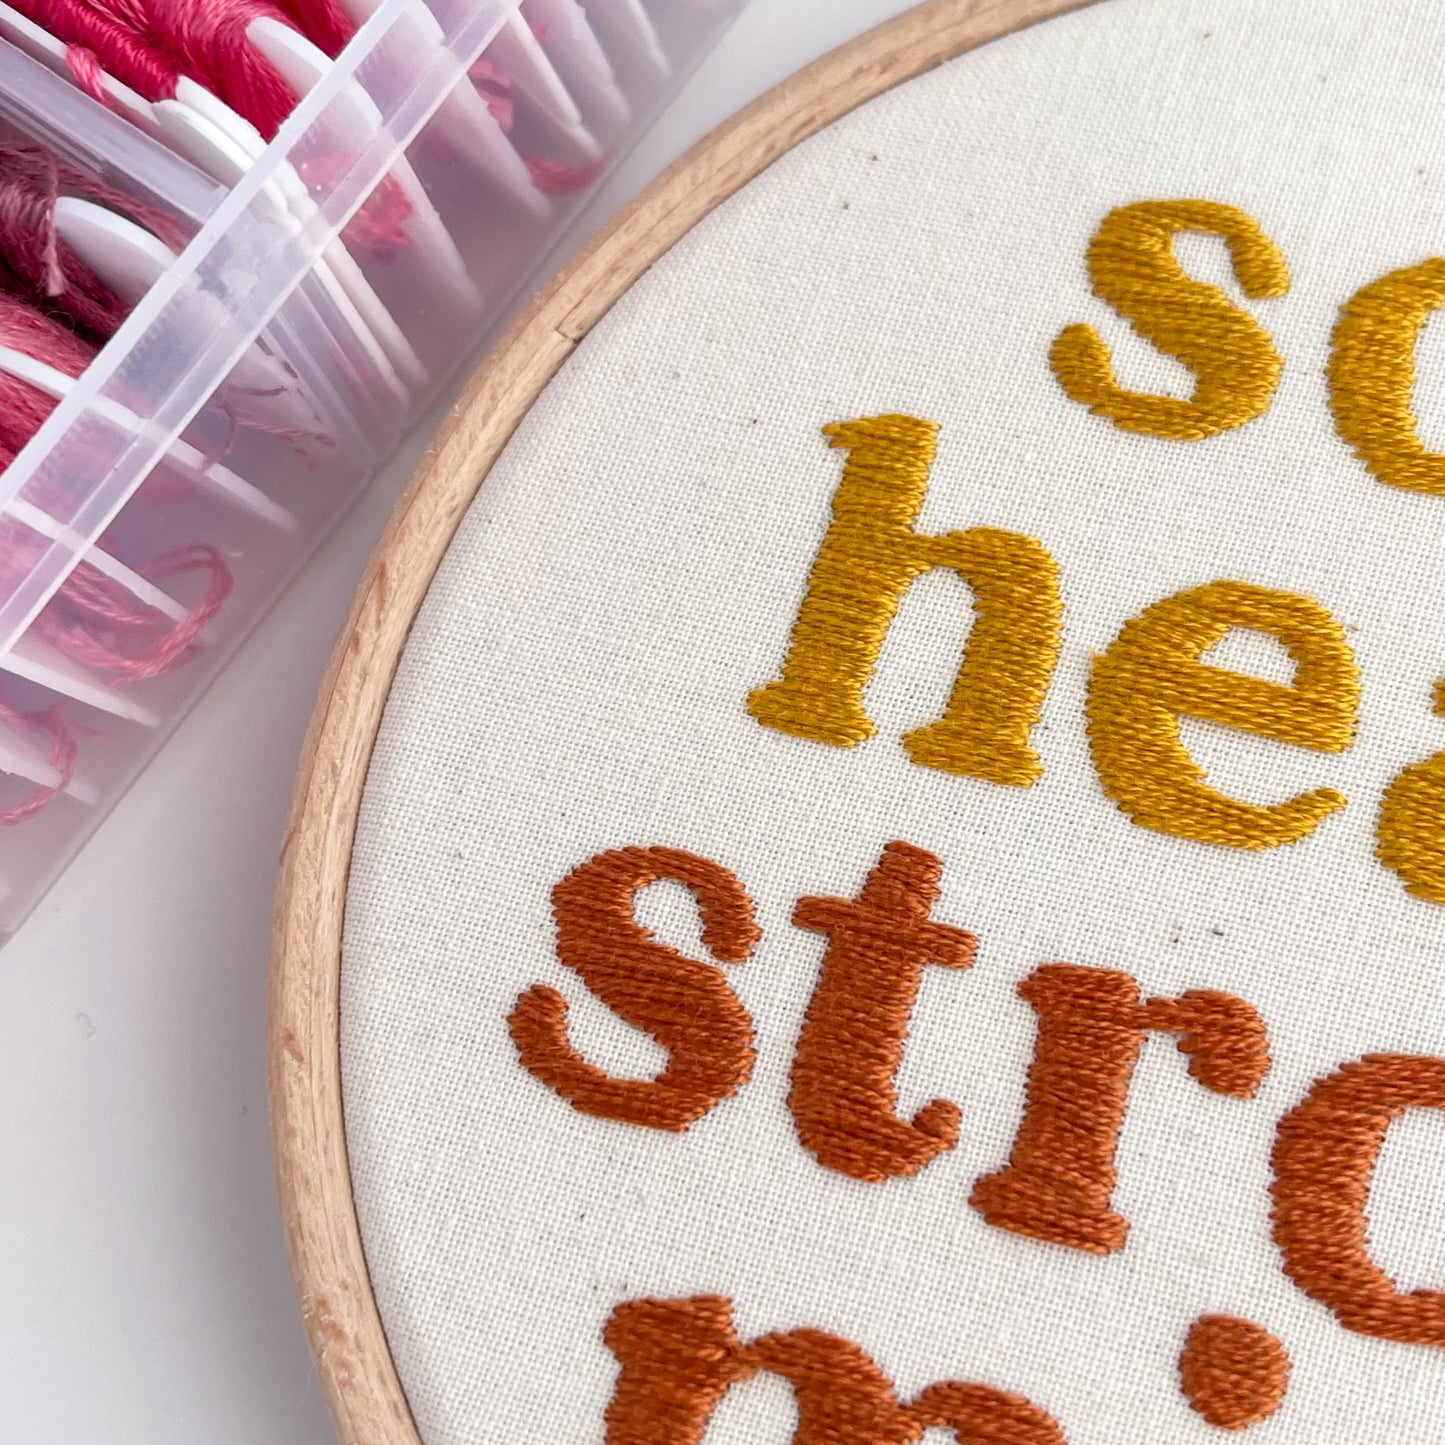 Soft Heart Strong Mind Embroidery Hoop